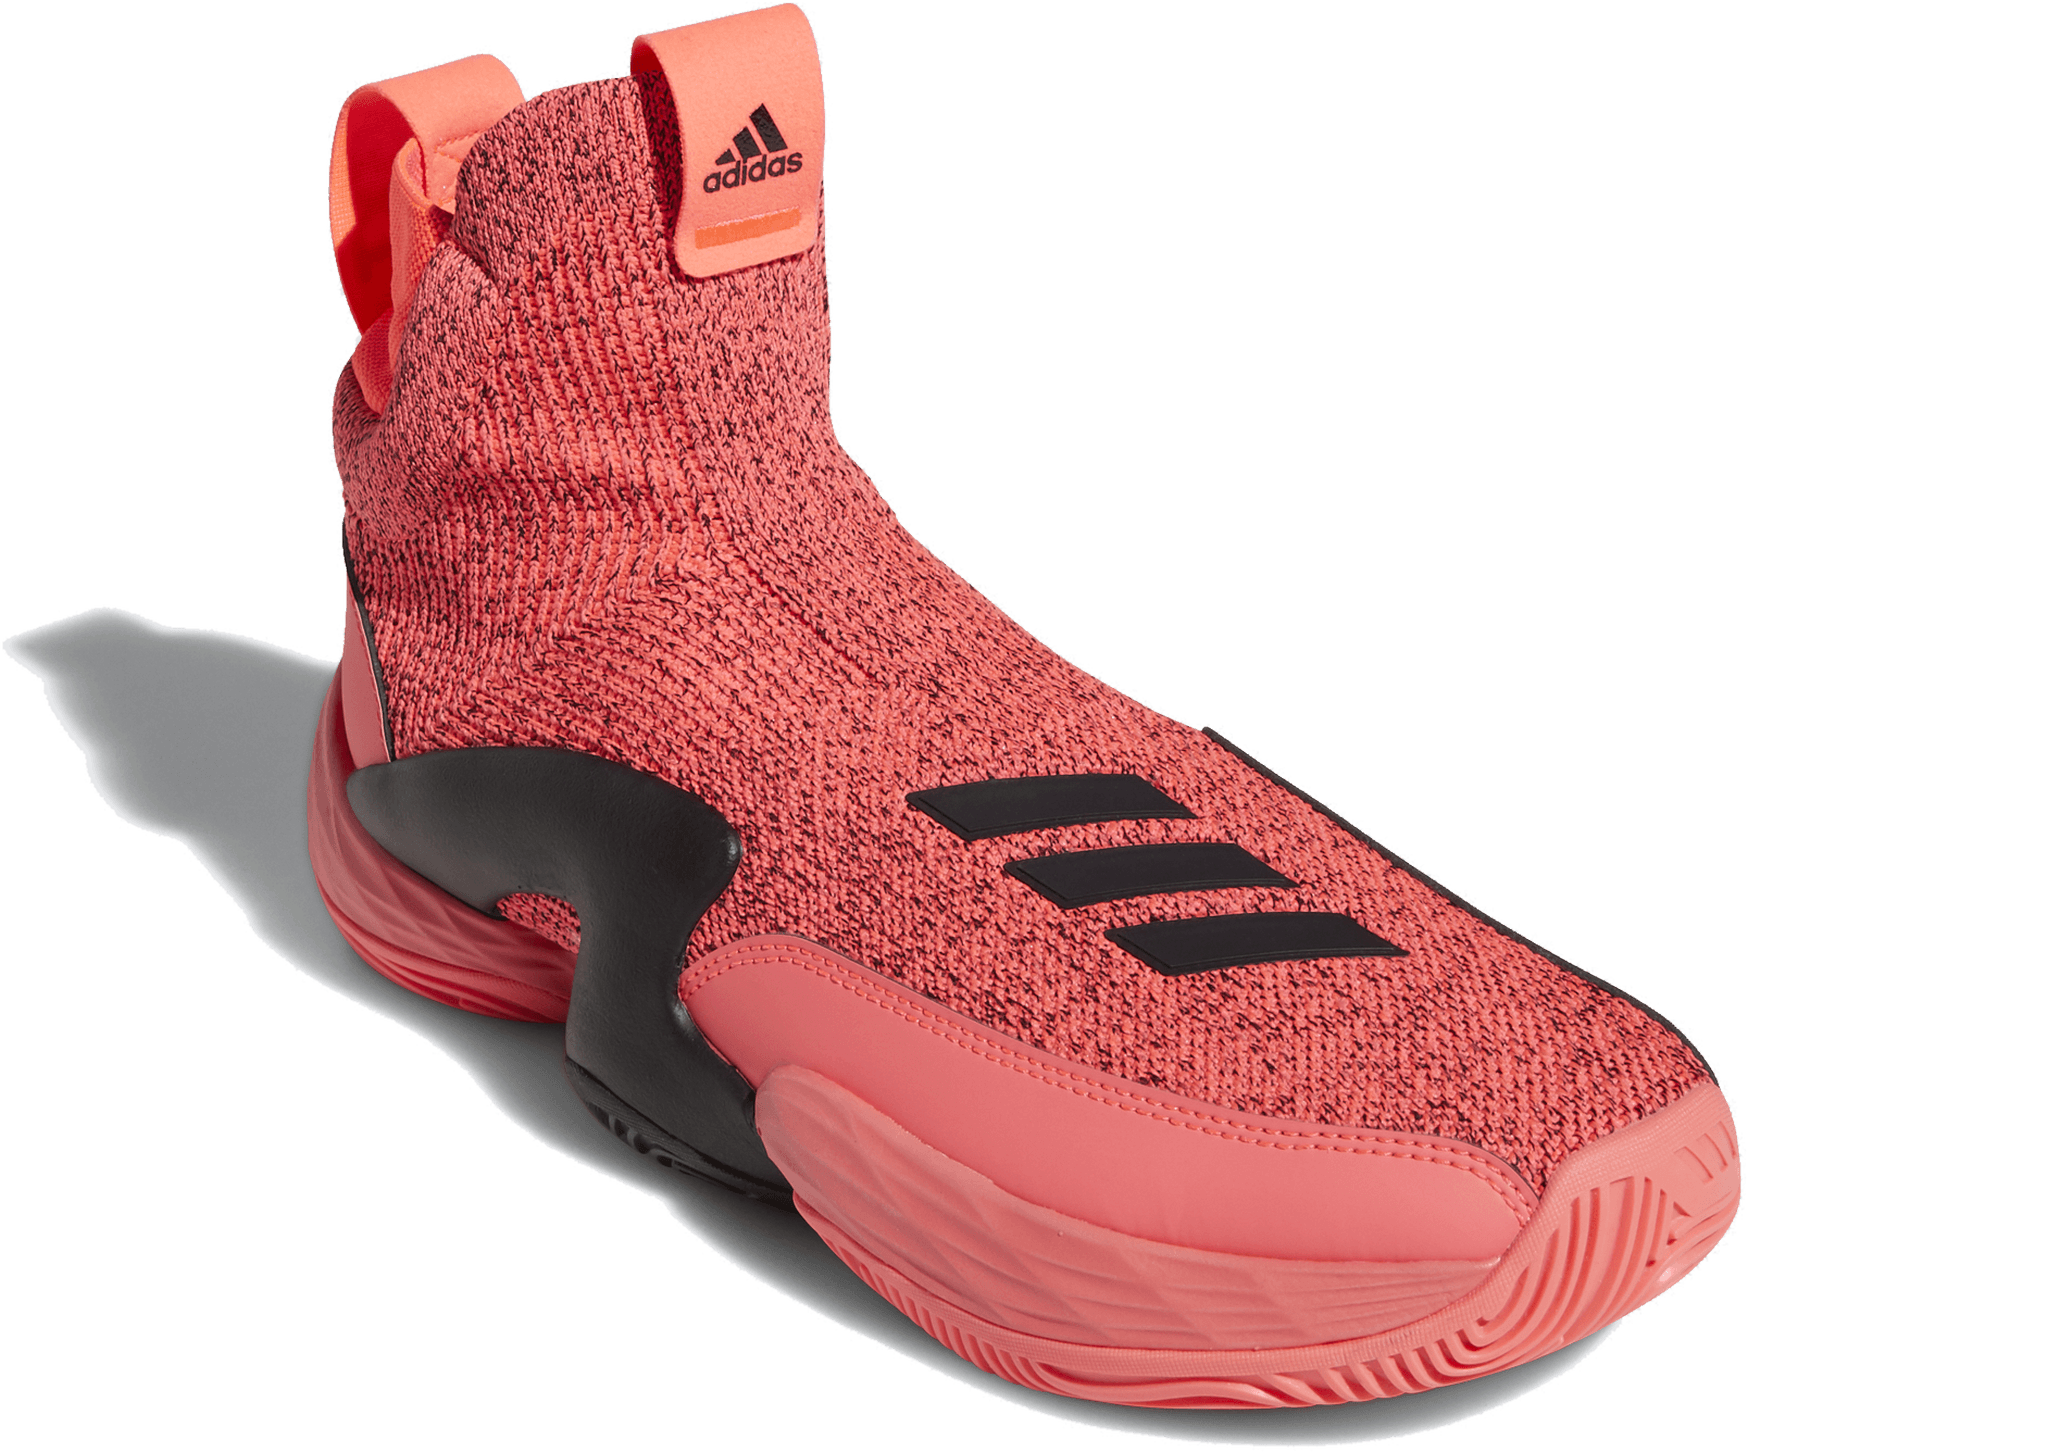 most popular adidas basketball shoes